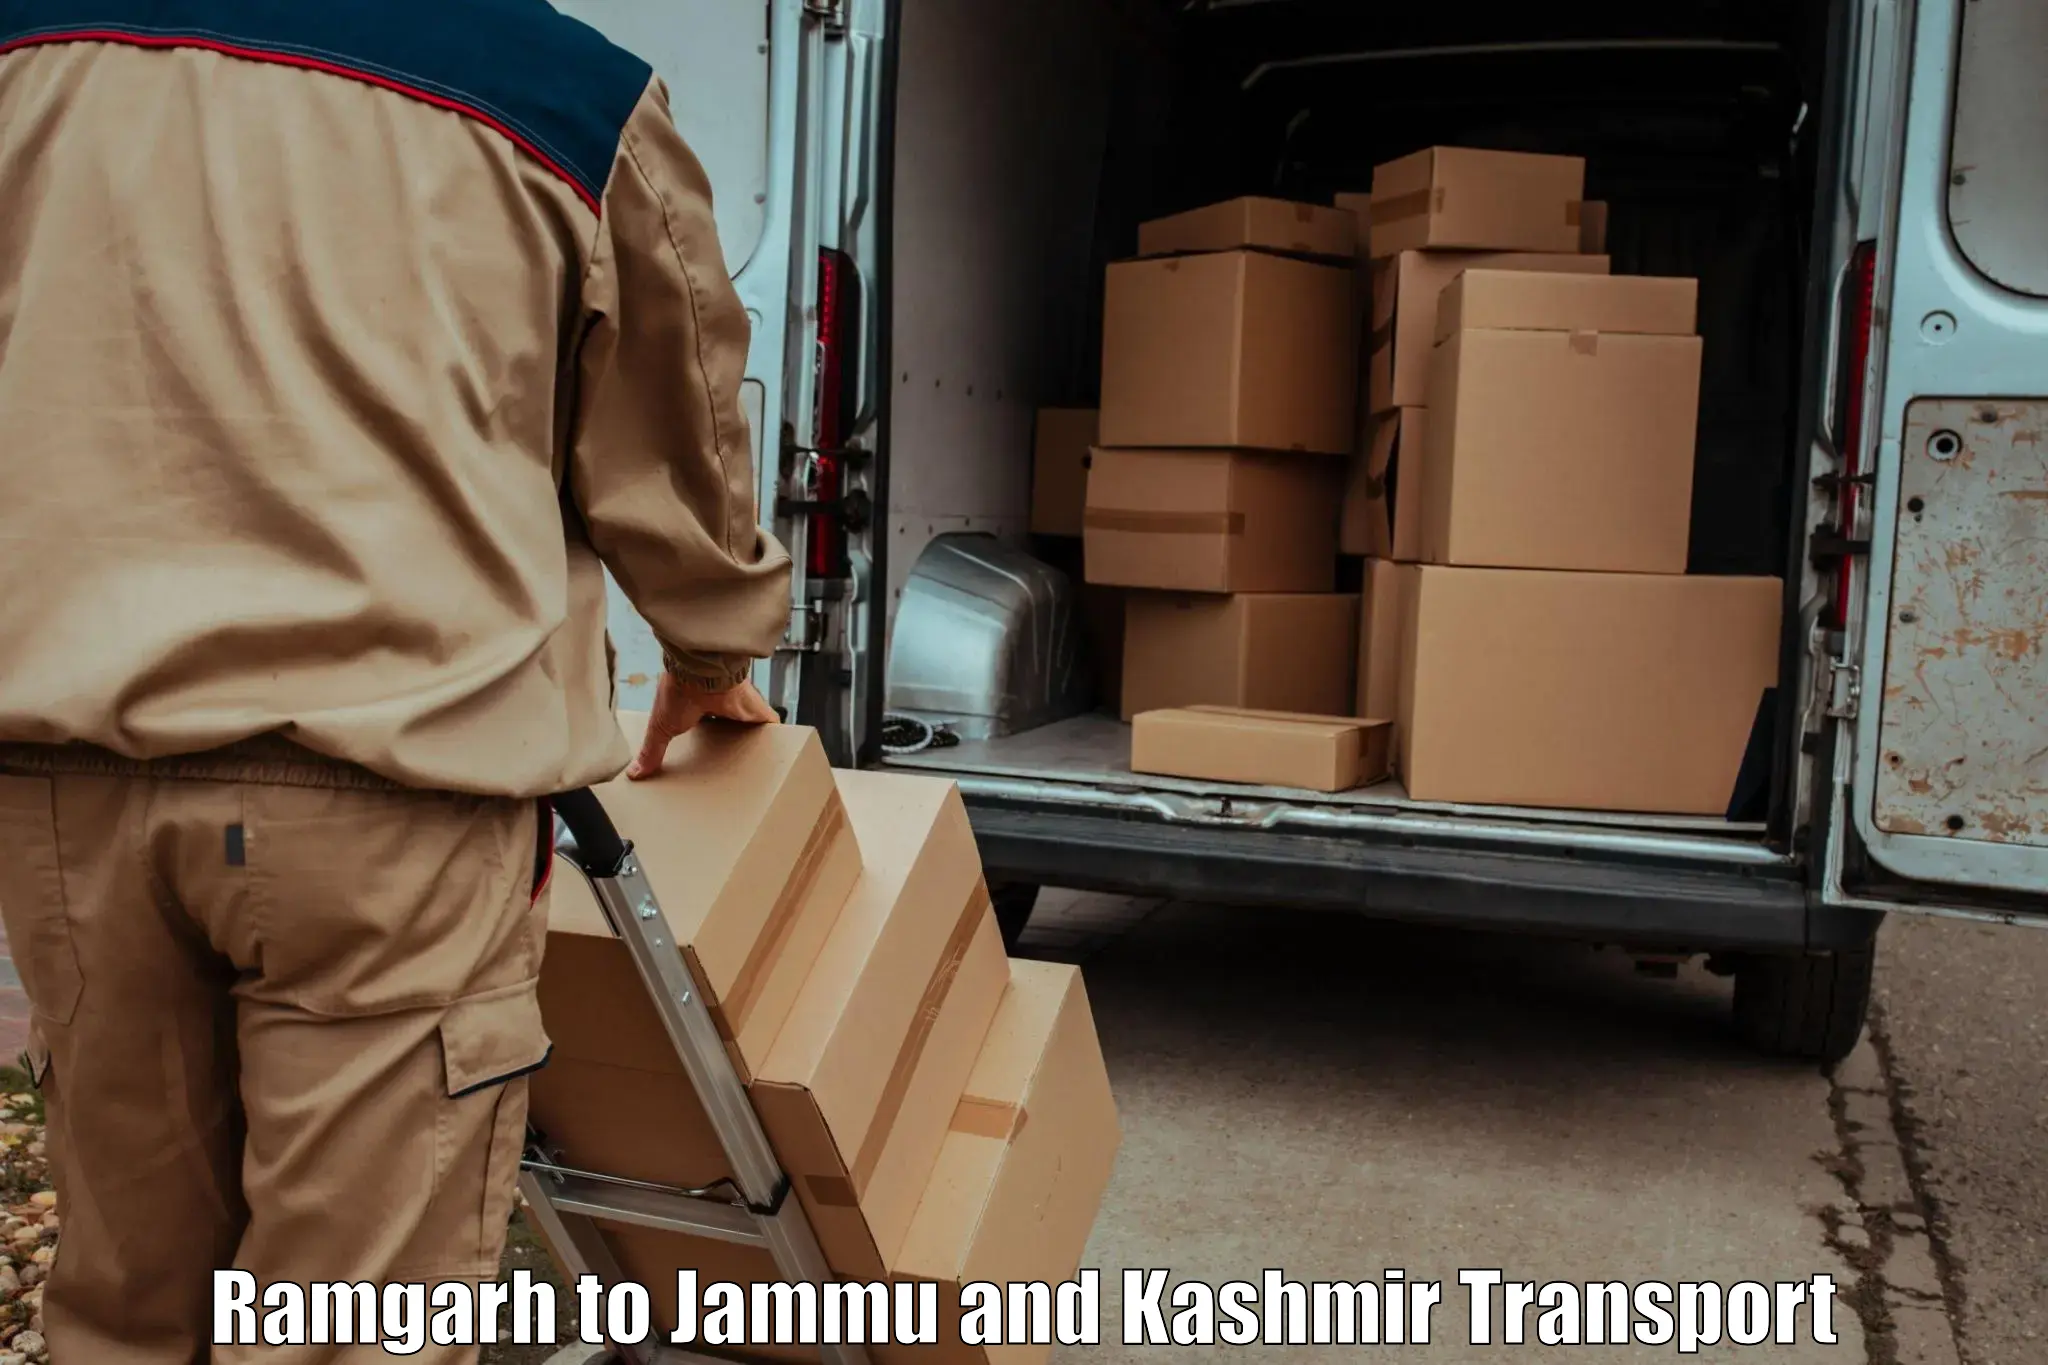 Daily parcel service transport in Ramgarh to Udhampur